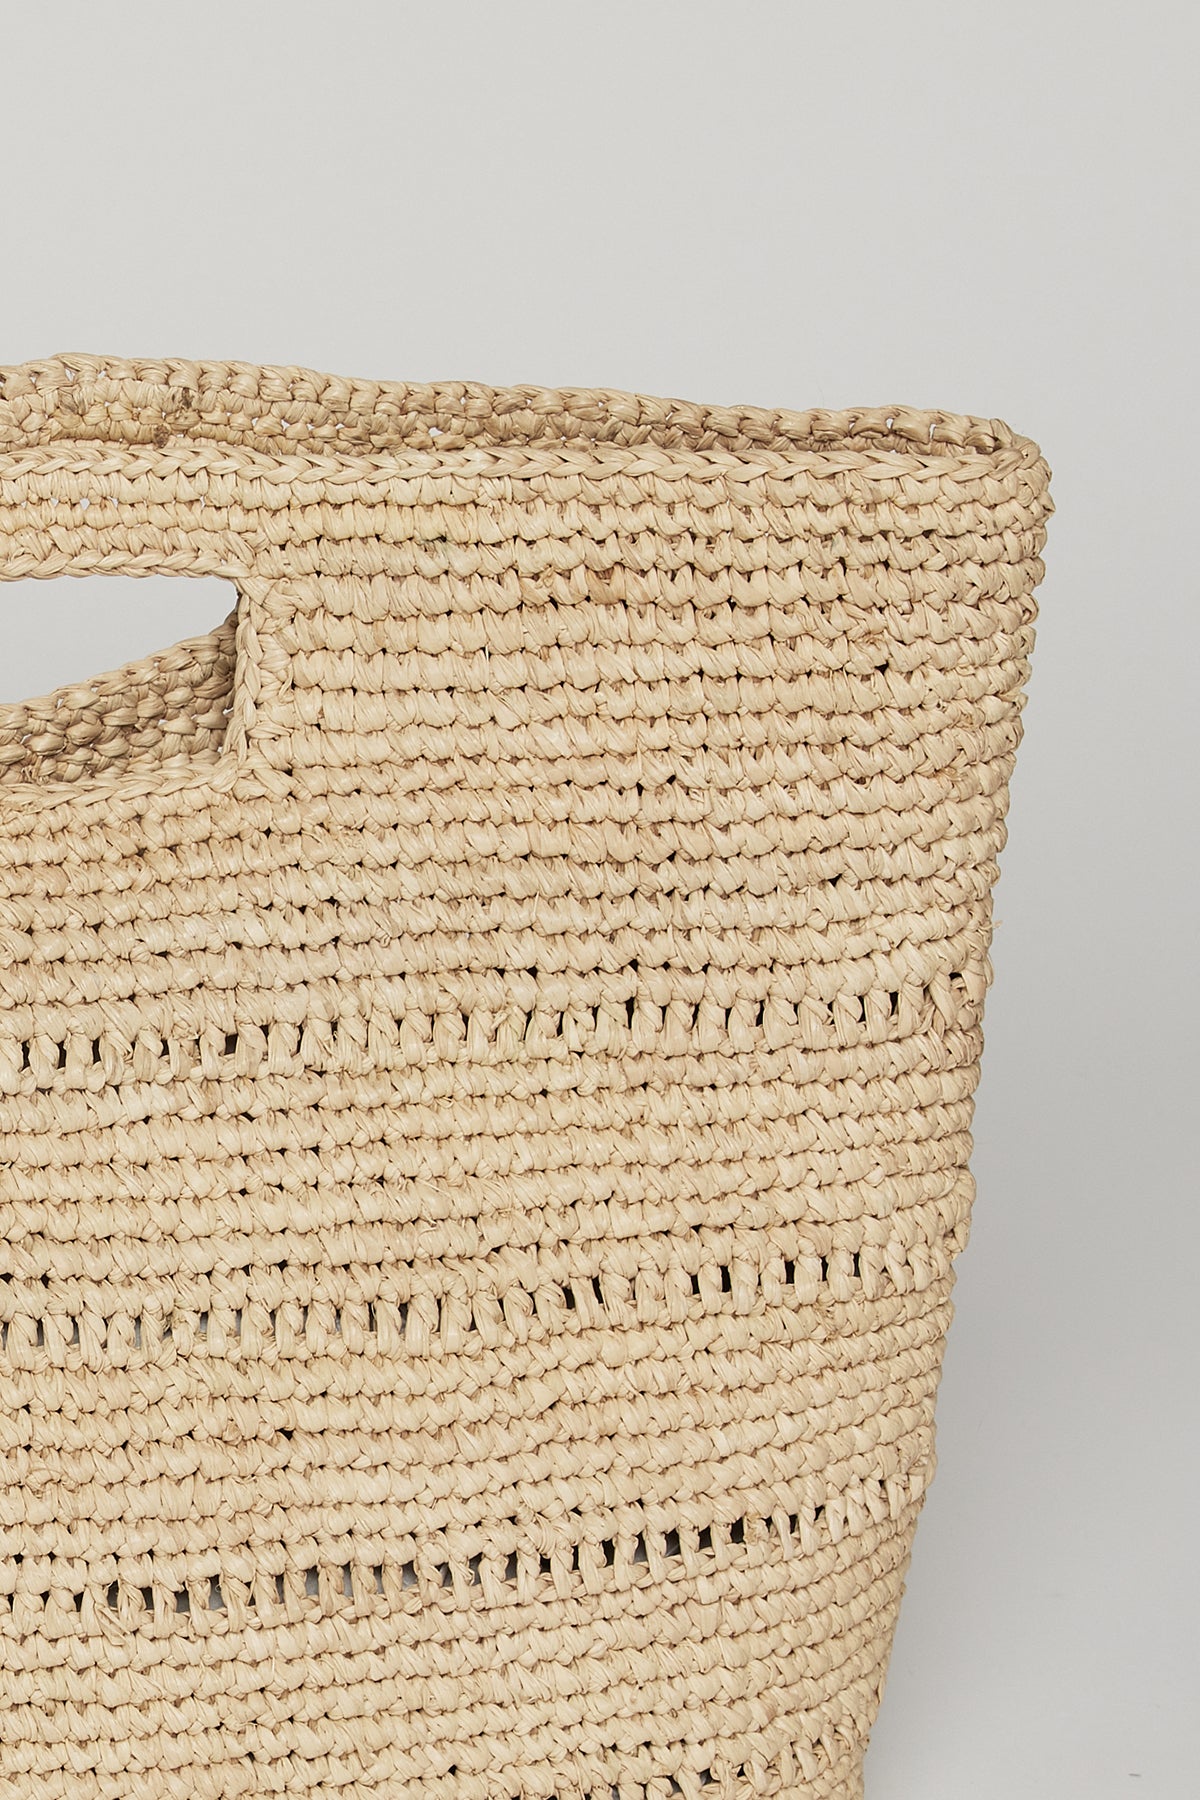 Close-up of a Velvet by Graham & Spencer Naomi Handheld Straw Bag featuring a sturdy handle and openwork design, against a neutral backdrop.-36571449589953